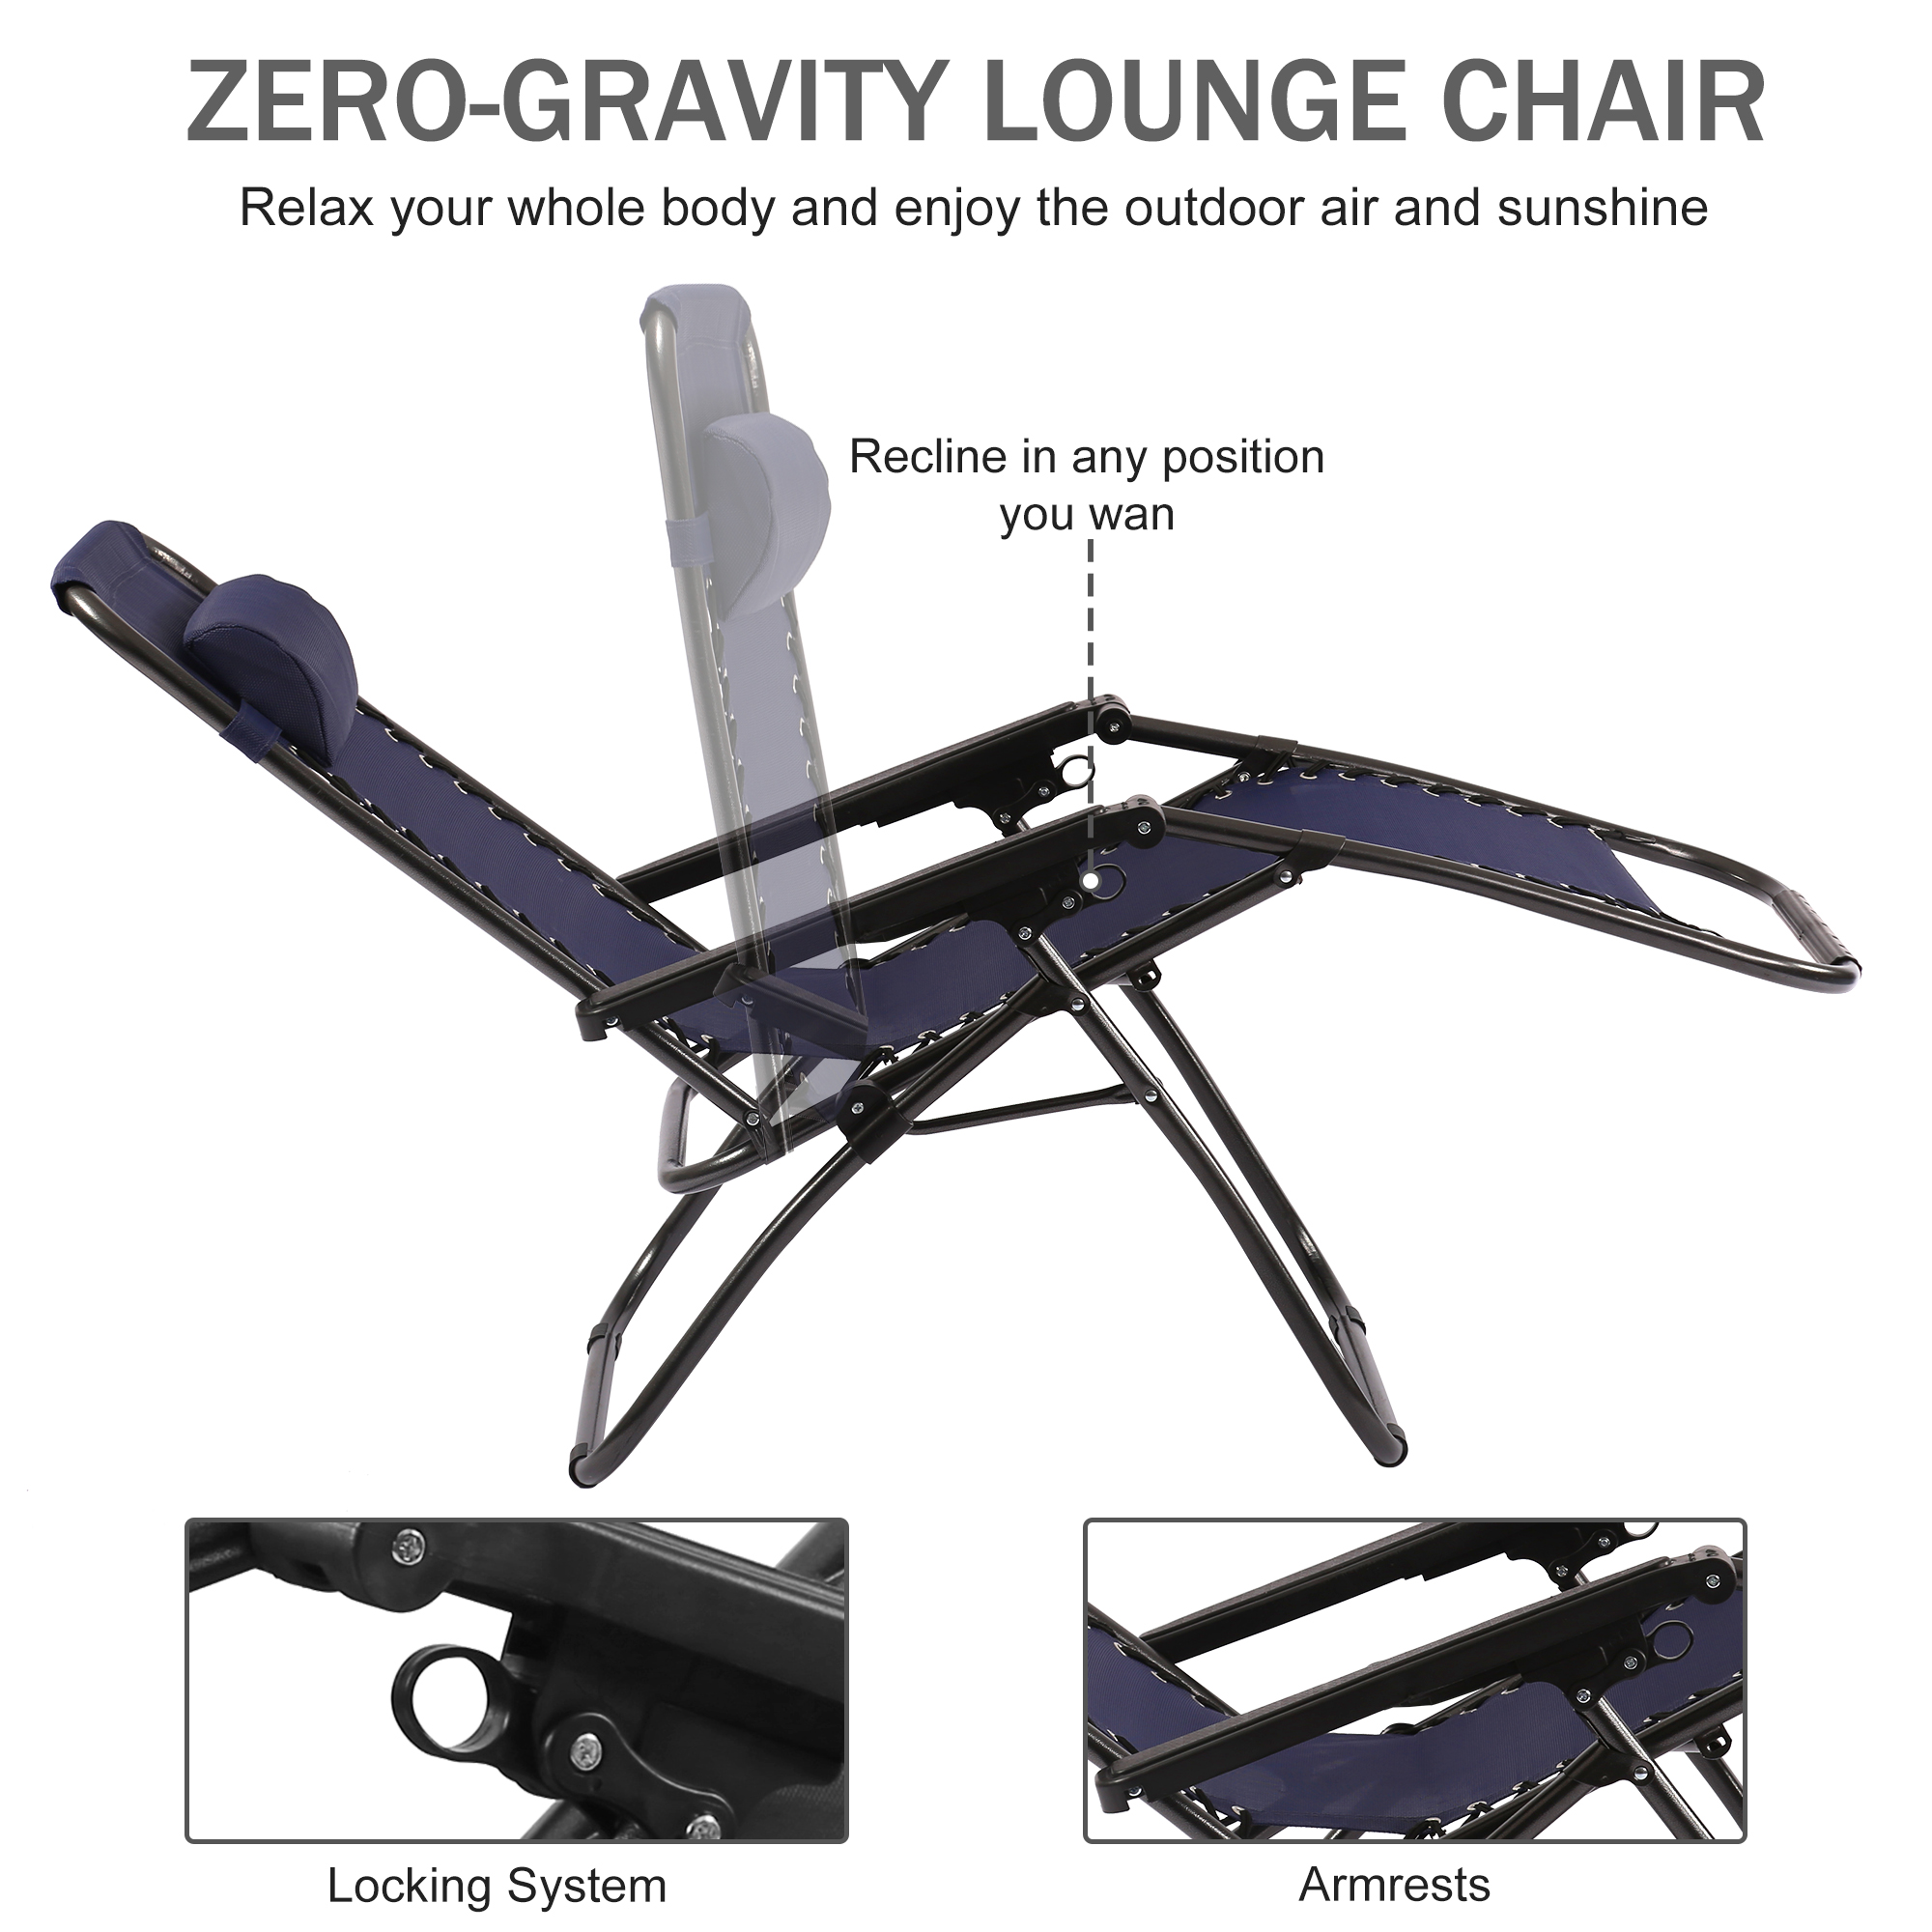 Outdoor Zero Gravity Chairs 2 Pack, Folding Patio Lounge Camping Chair Recliner with Adjustable Pillow Outdoor Furniture for Pool Side Camping Yard Beach - image 3 of 7